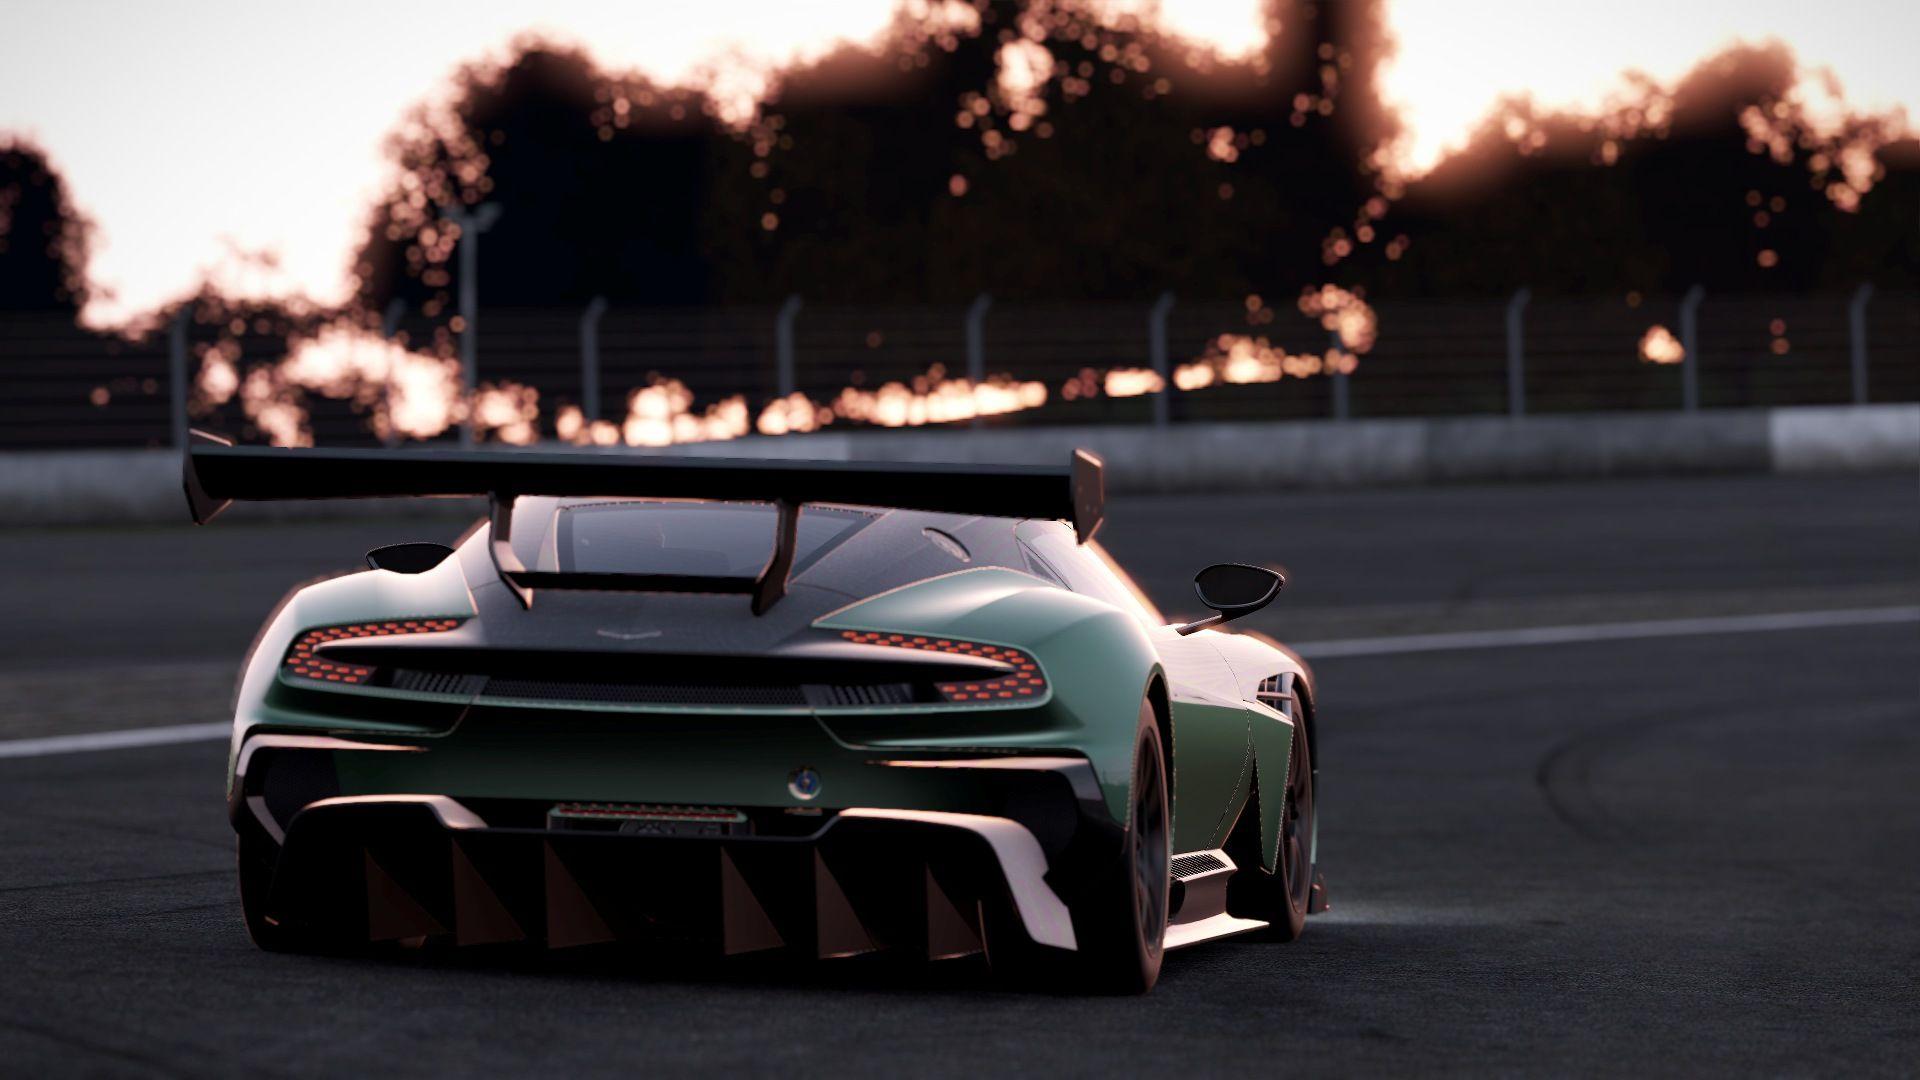 Project CARS 2 (Game) Wallpaper